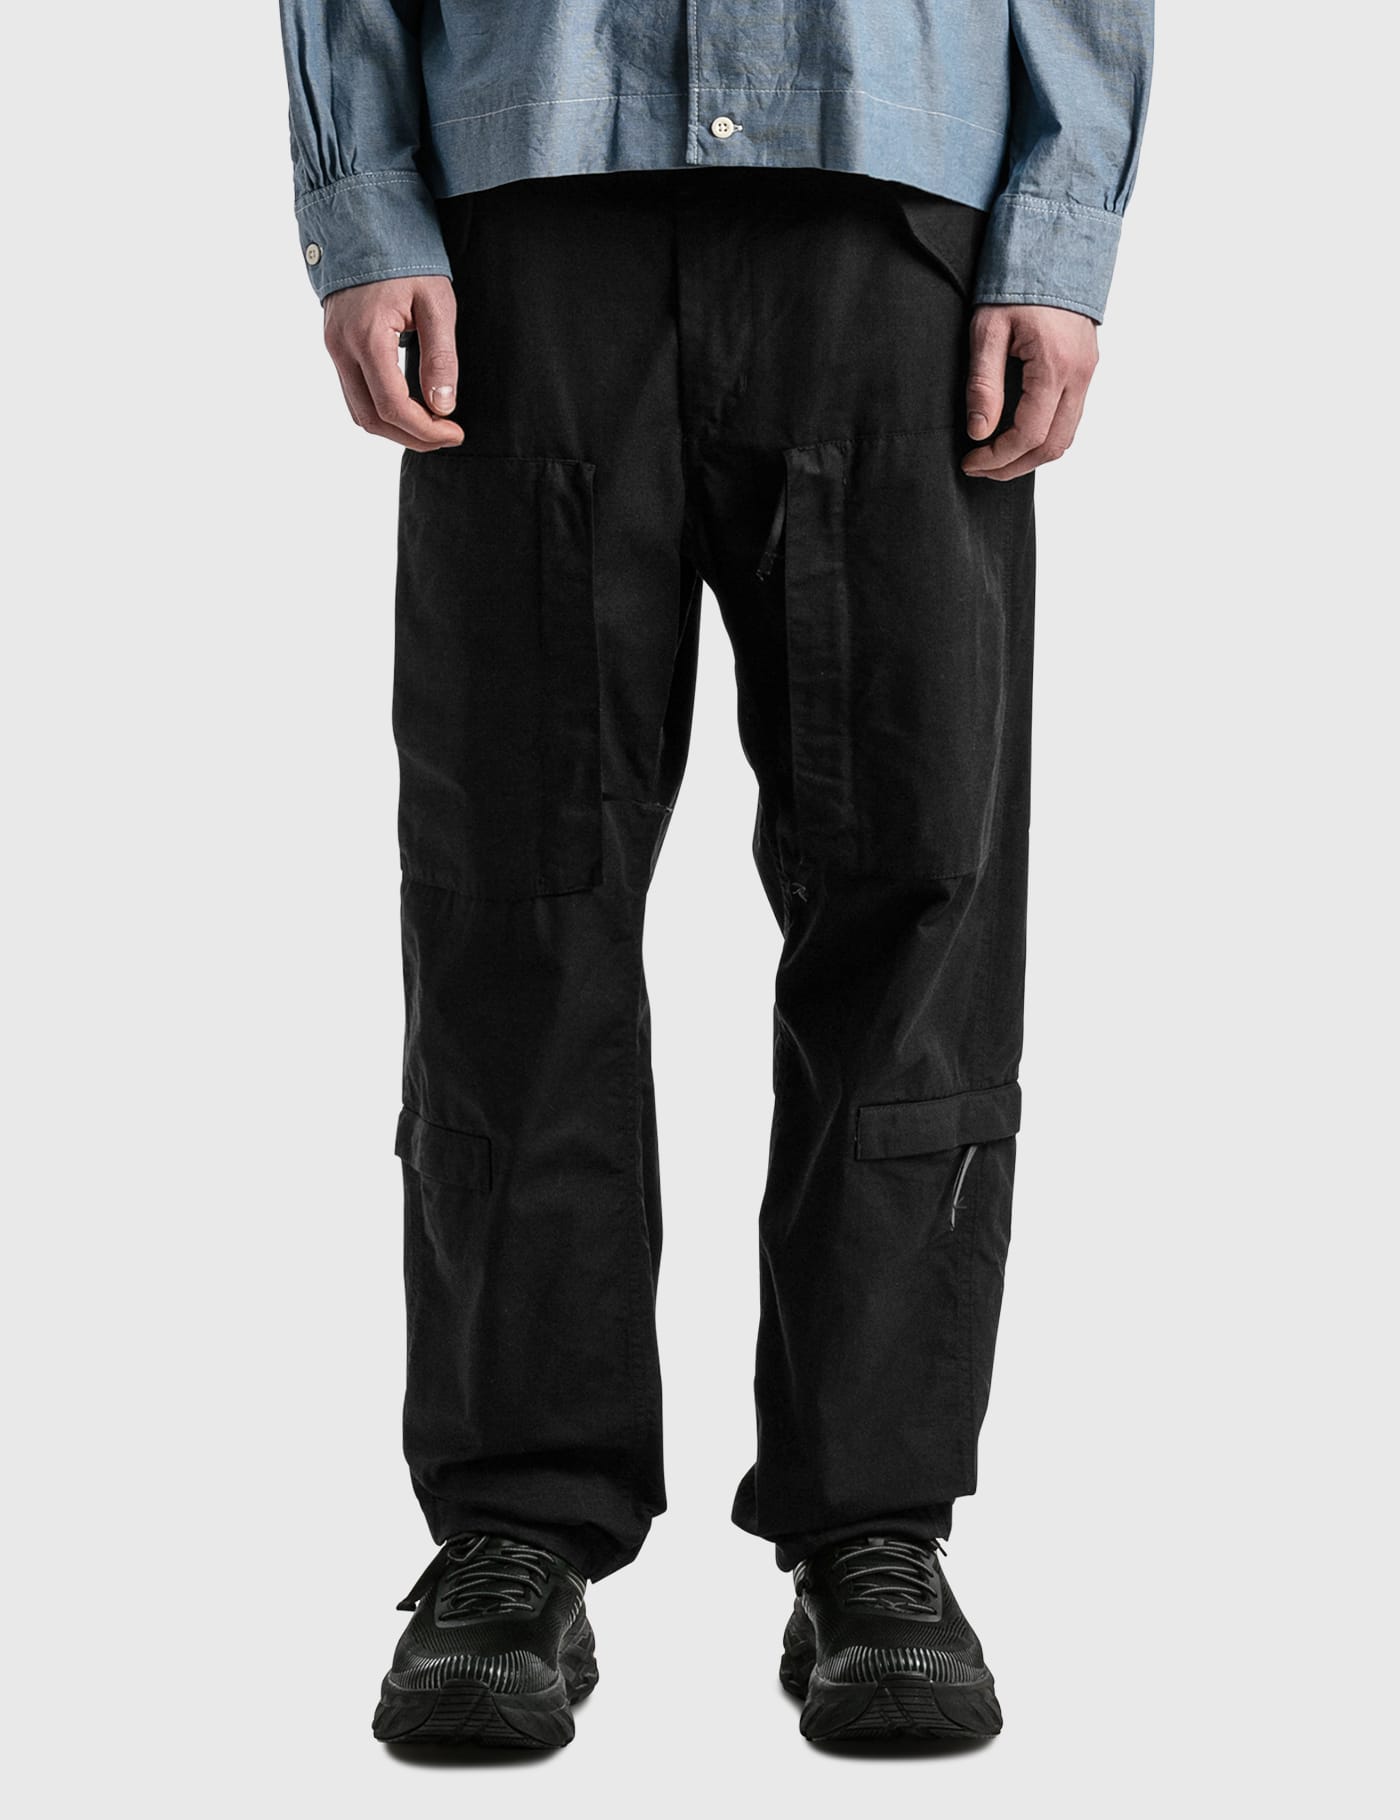 Engineered Garments - Aircrew Pants | HBX - Globally Curated 